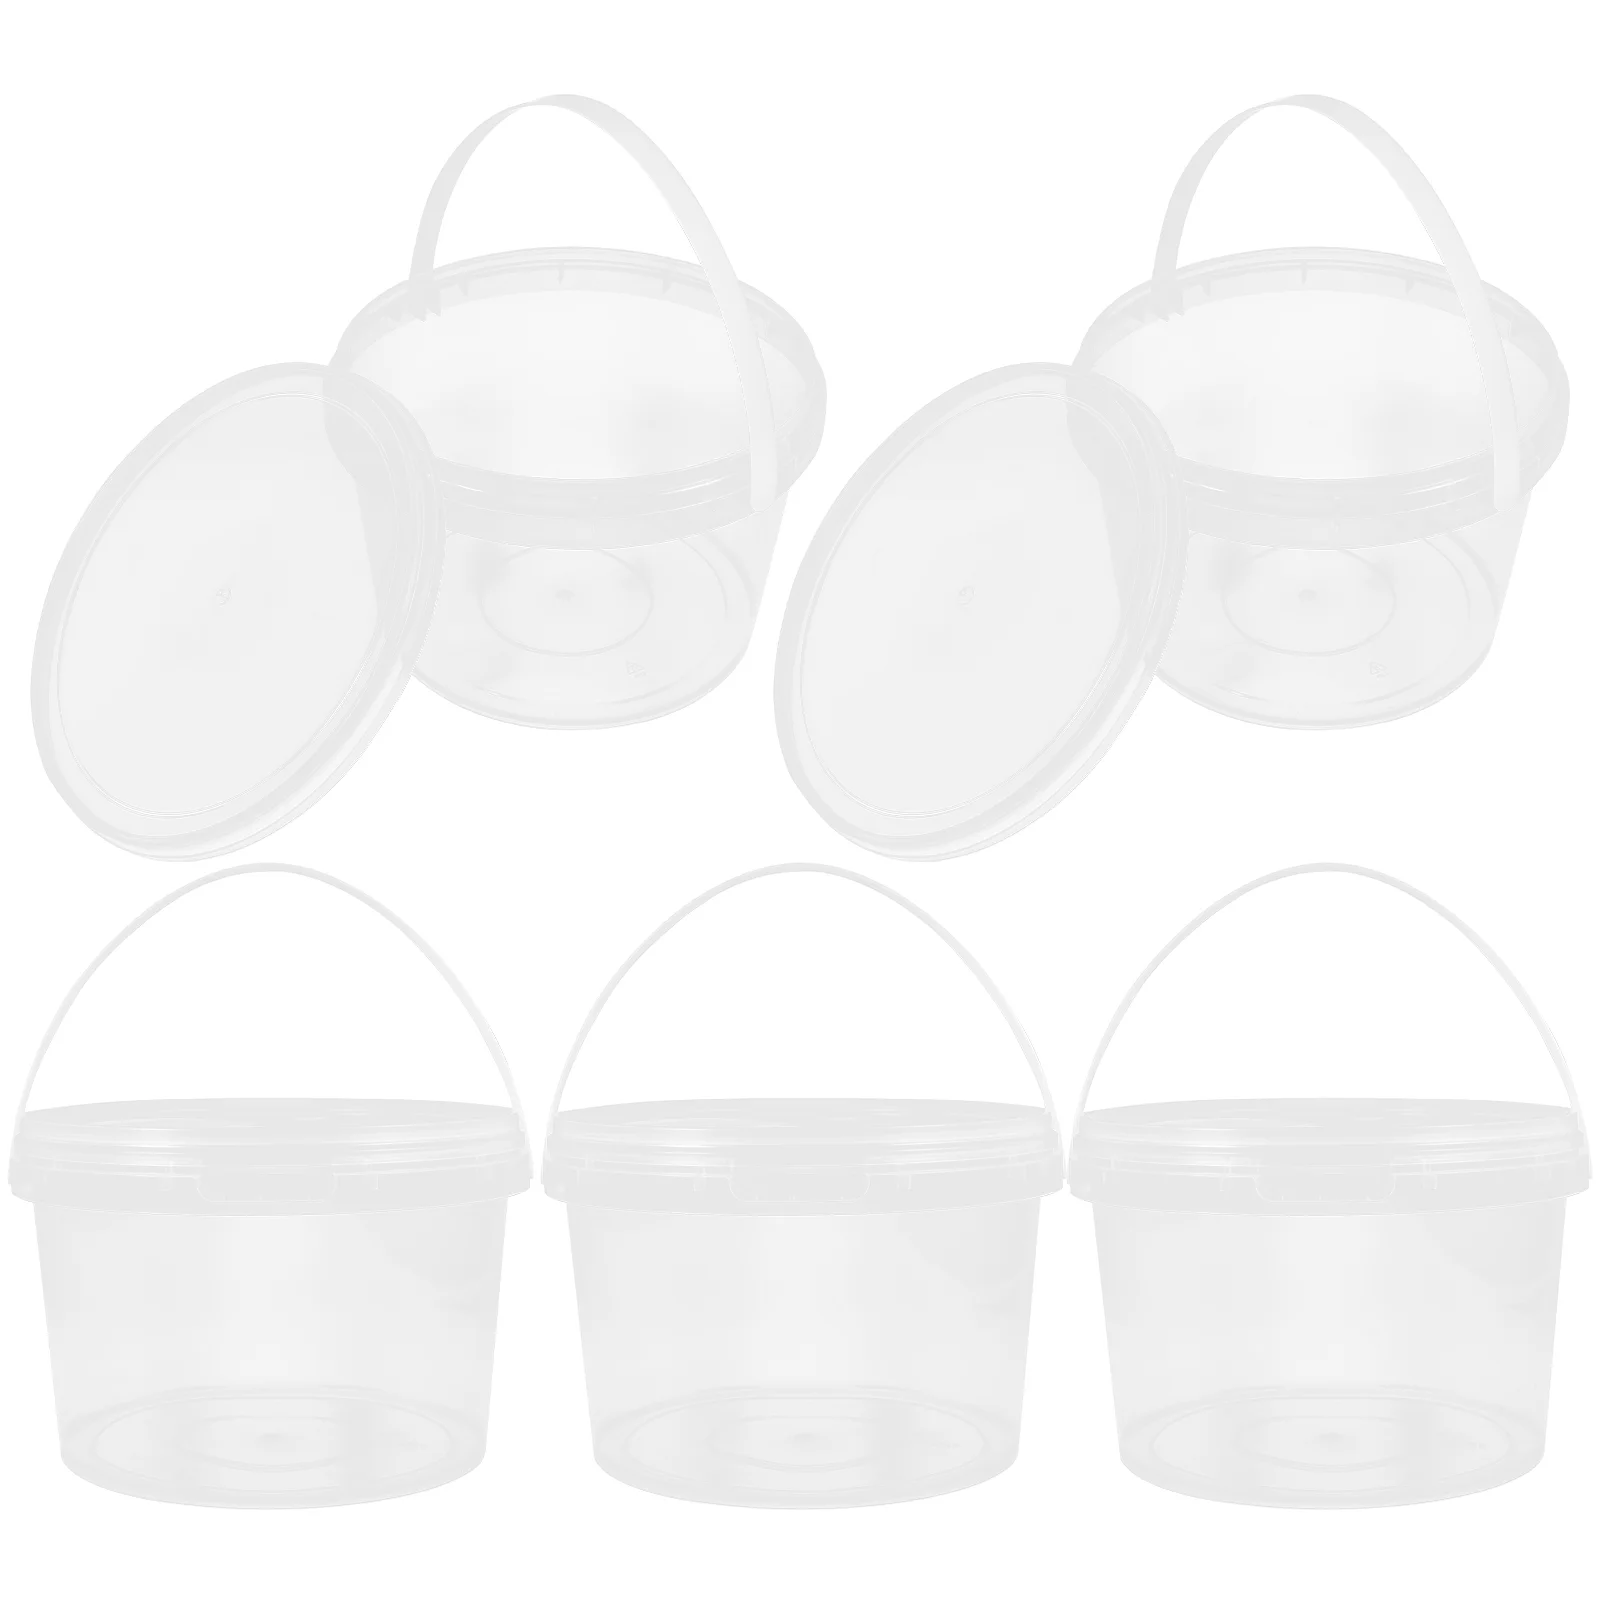 

8 Pcs Reusable Lobster Containers Lids Ice Cream Crayfish Bucket Clear Food Buckets Portable Bin Homemade Holder